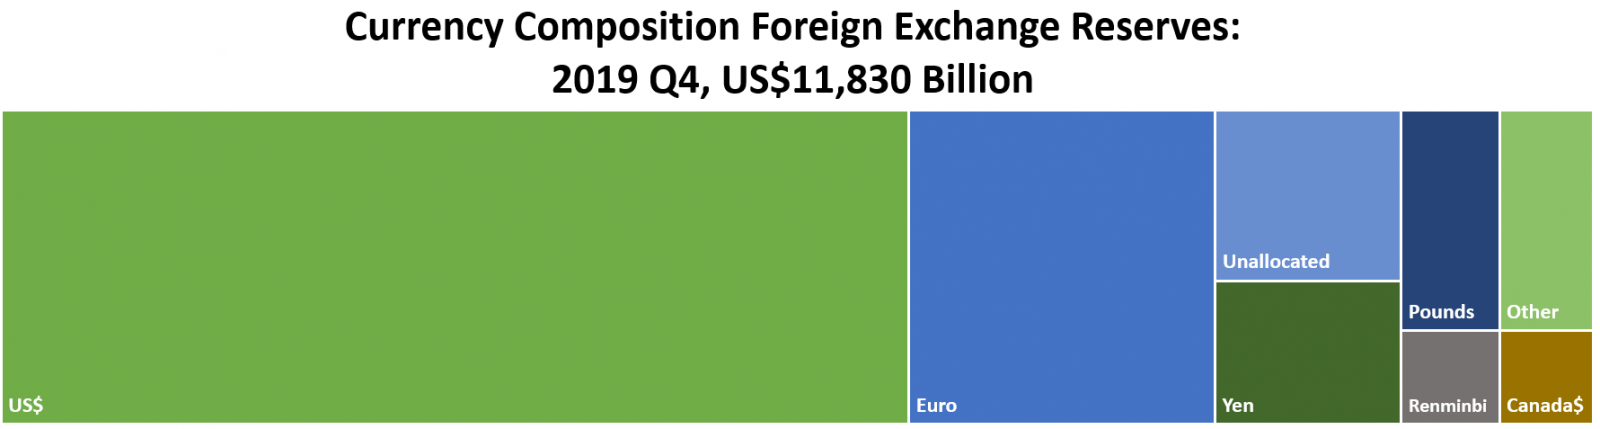 Currency Composition Foreign Exchange Reserves: 2019 Q4, Total US$11,830 Billion:   (billions) US$ $6,746  Euro	 $2,276  Renminbi $218  Yen  $631  Pounds $512  Canada$ $208  Other $488  Unallocated	$751 